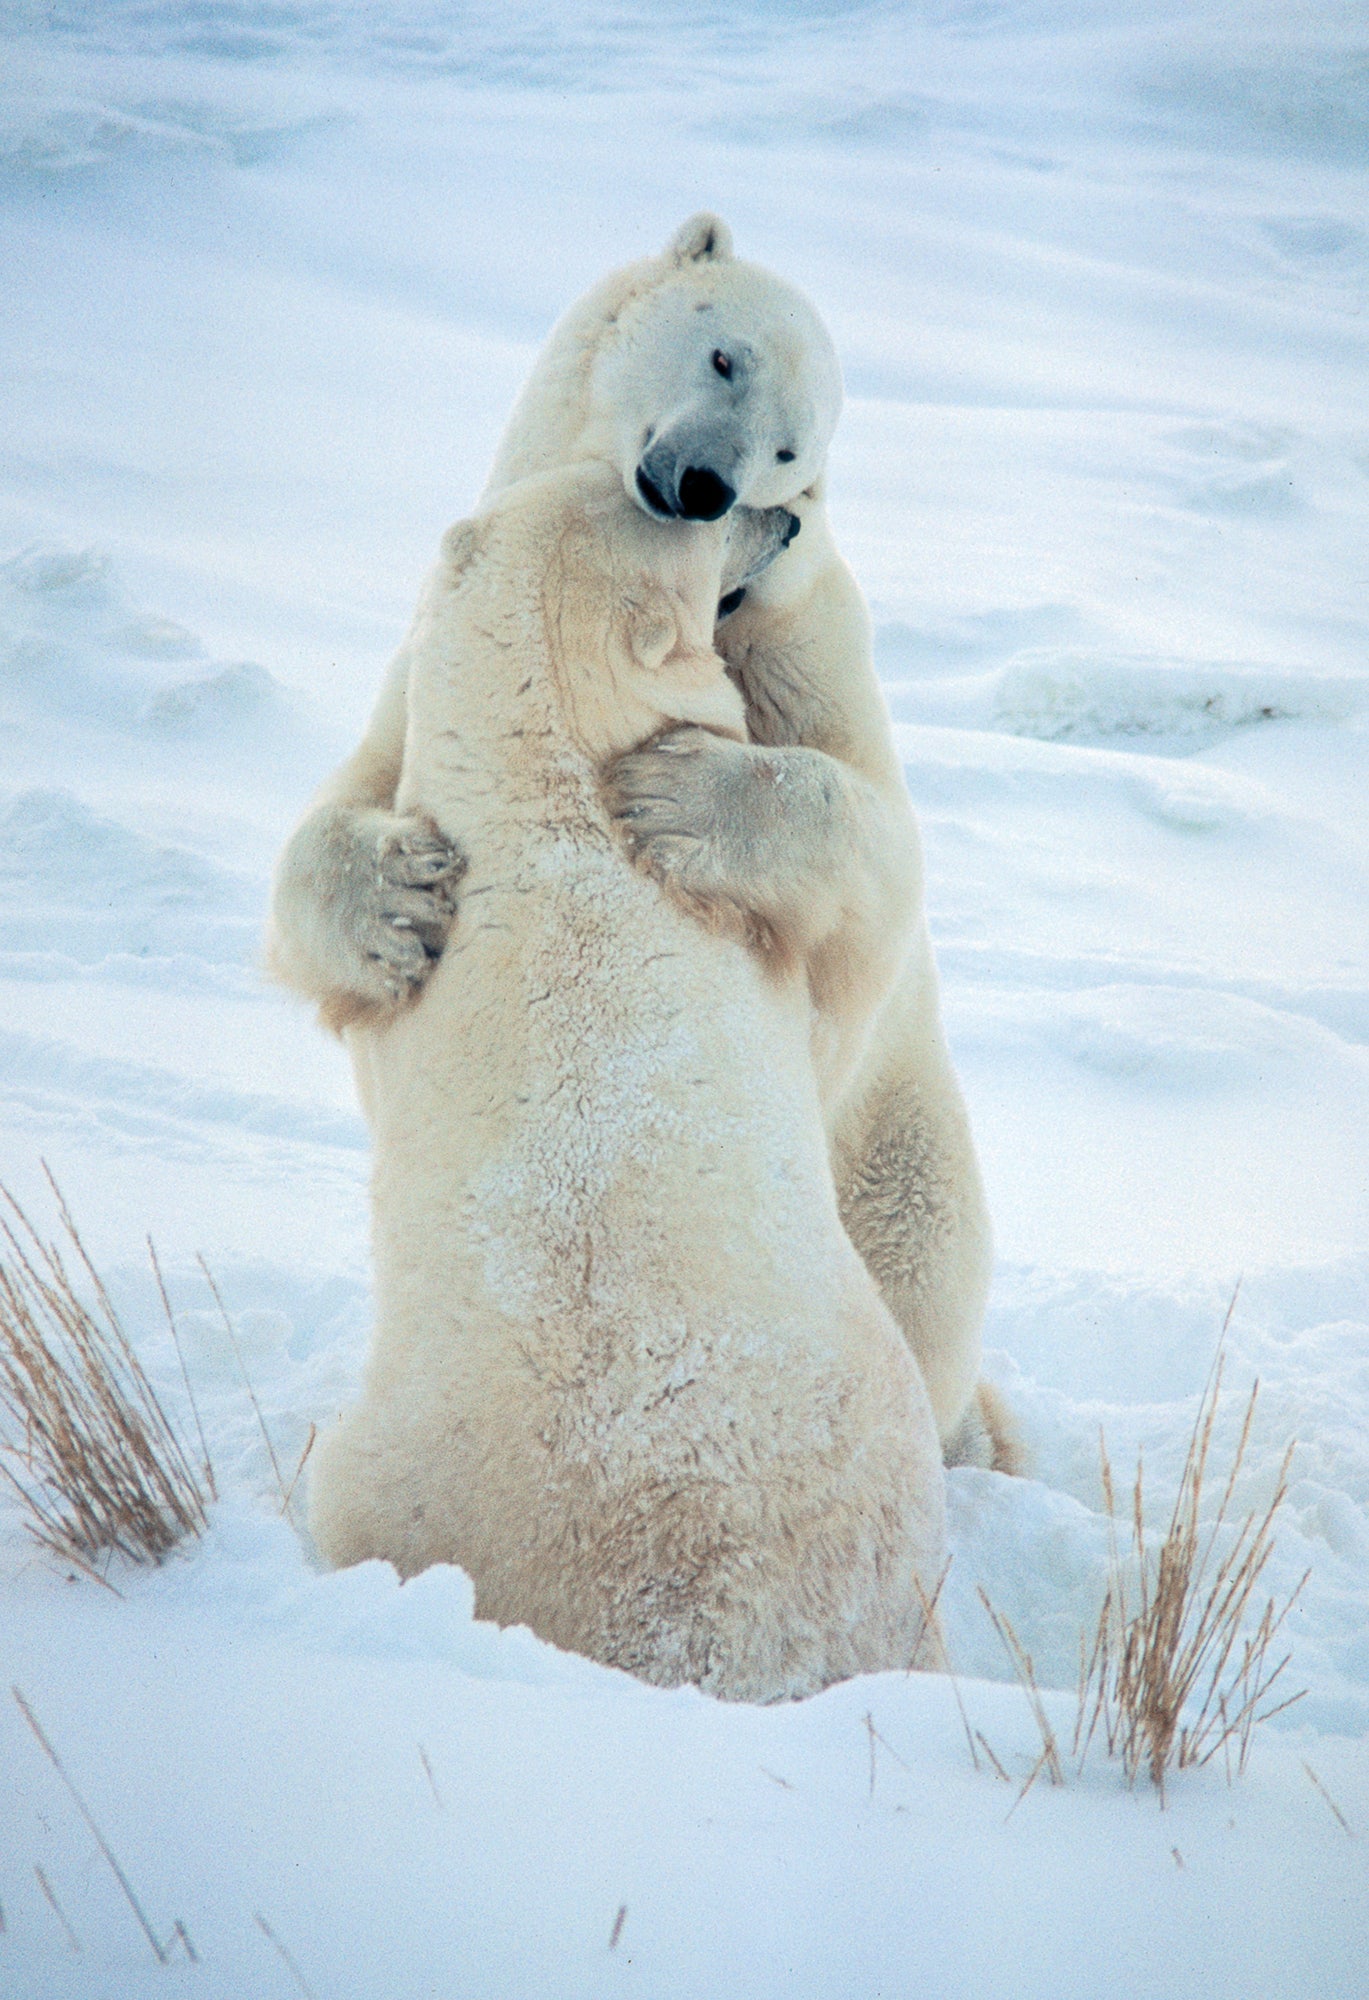 Two polar bears wrestling with each other. End of image description.